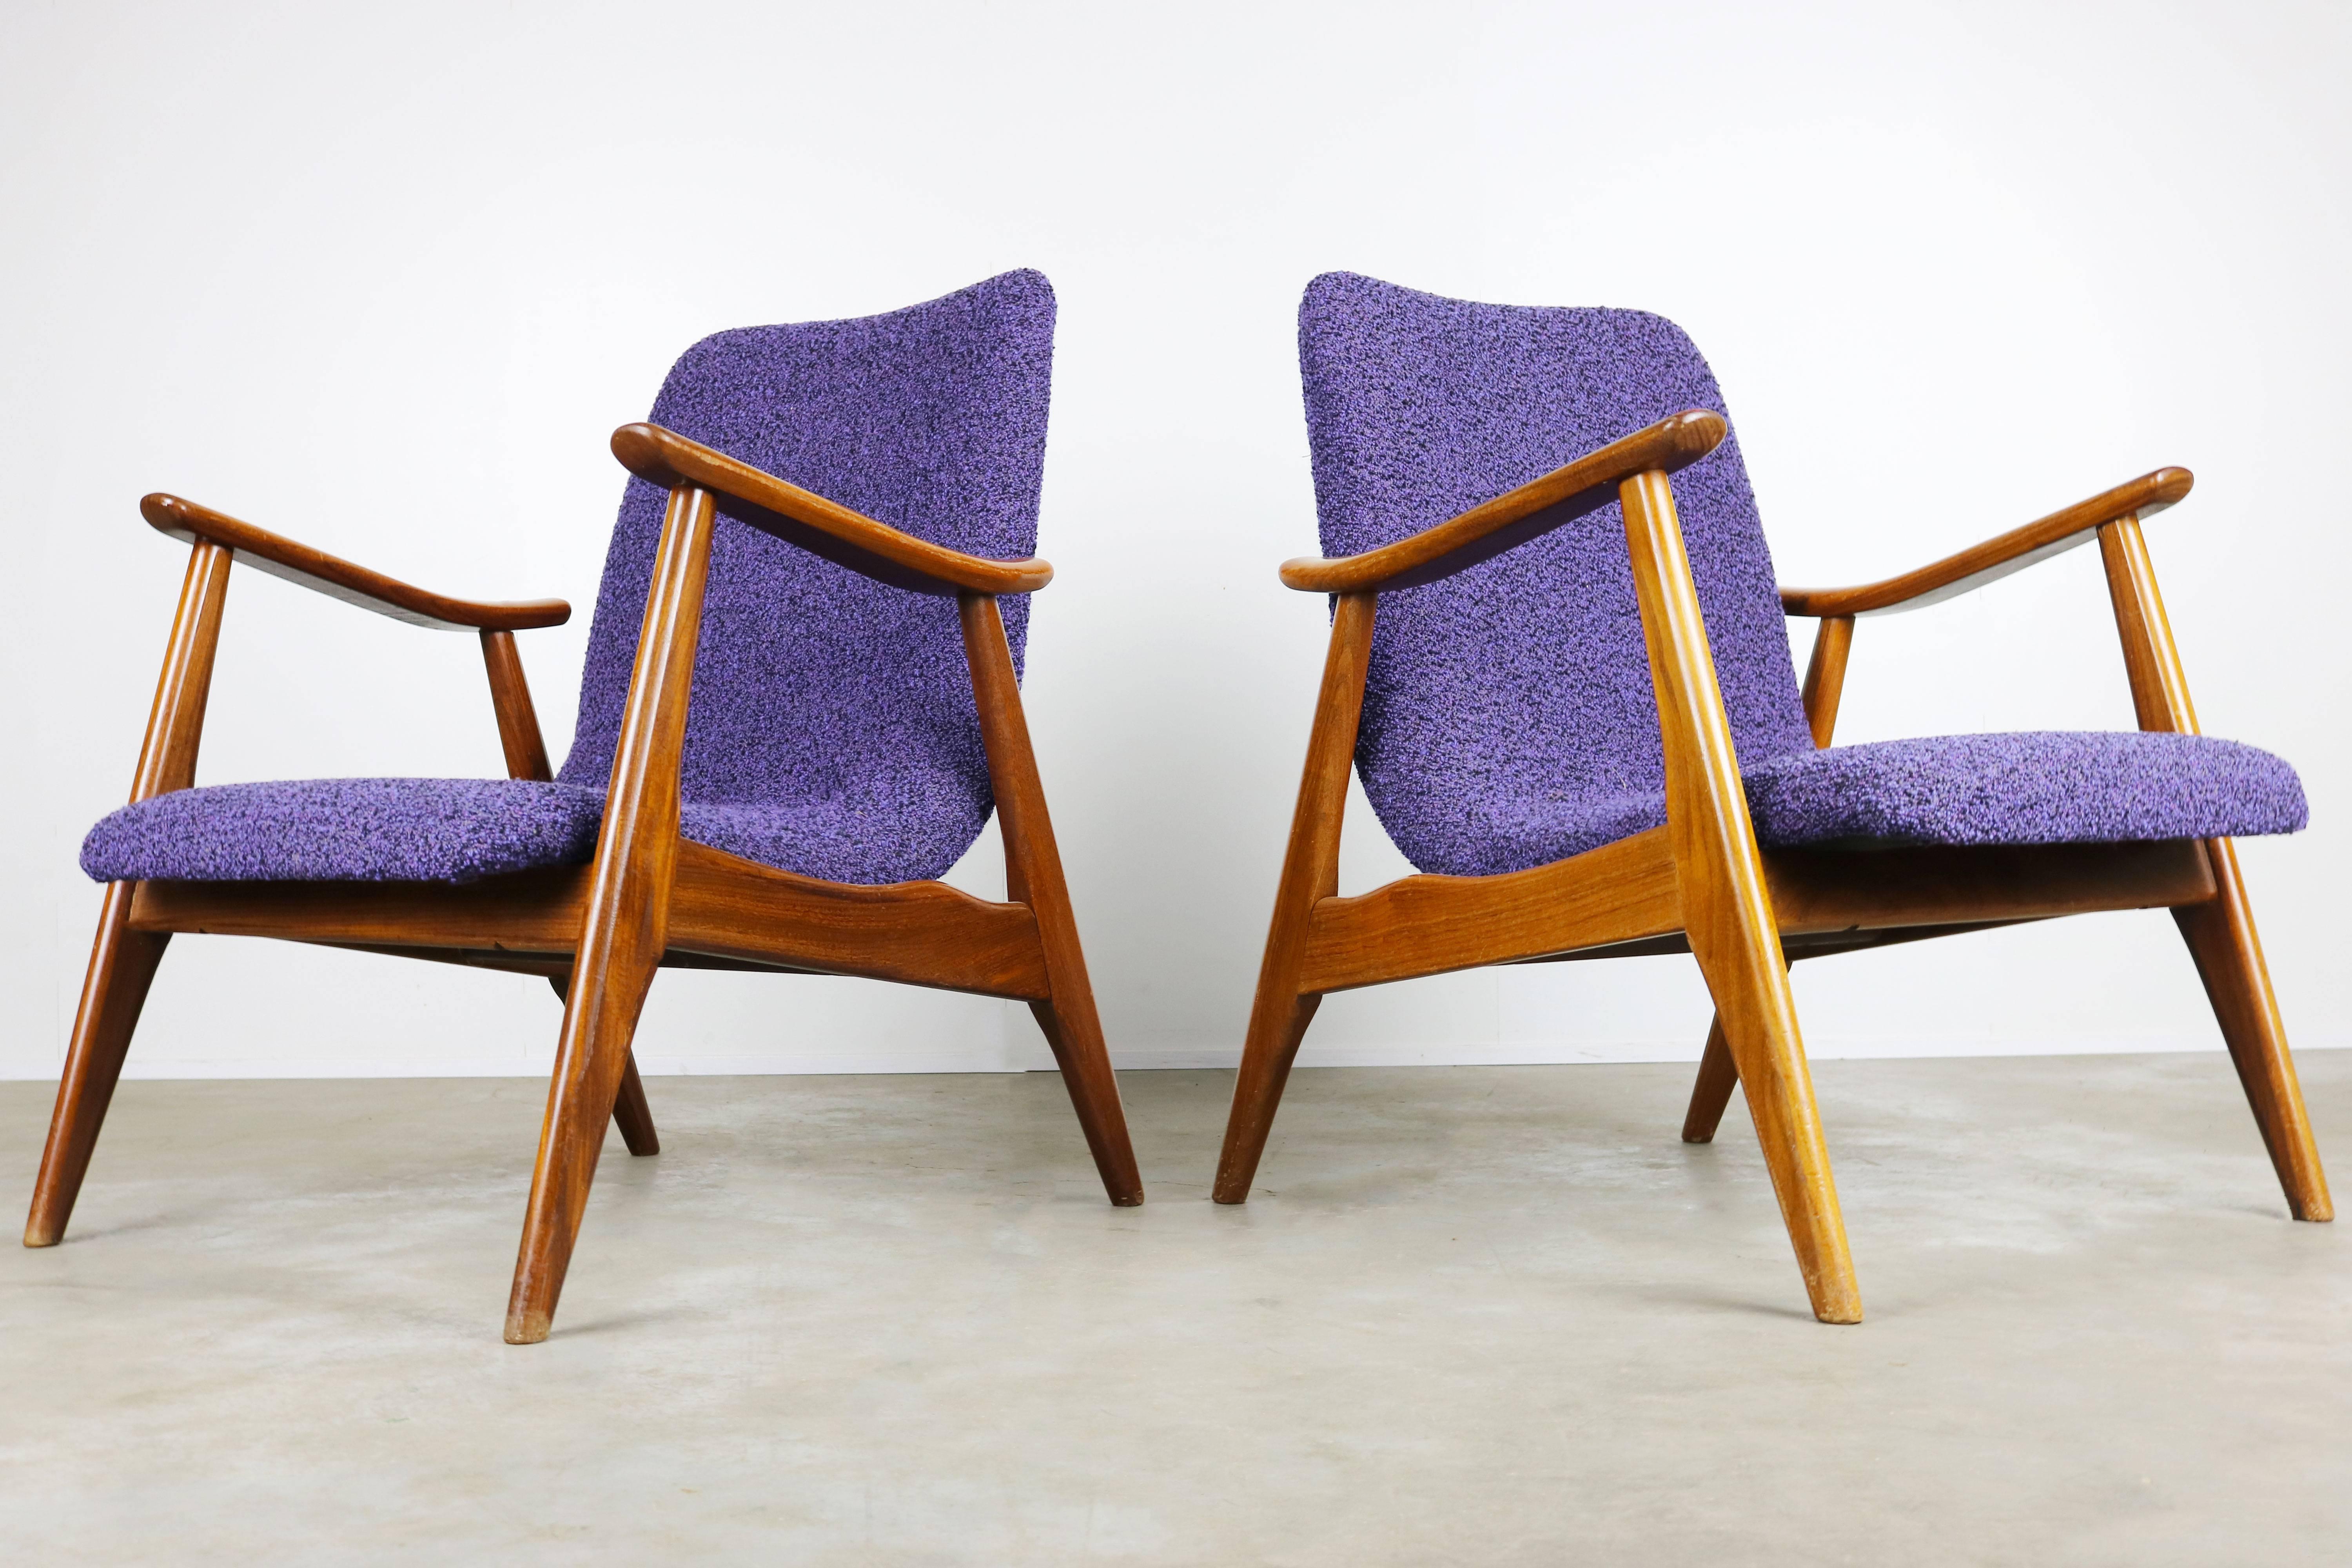 Wonderful set of two teak lounge chairs designed by Dutch Designer Louis Van Teeffelen for Webe, 1960. Sculpted teak frame with Minimalist seat. Very comfortable and stylish. new upholstery in a purple/black wool (see close ups), little traces of